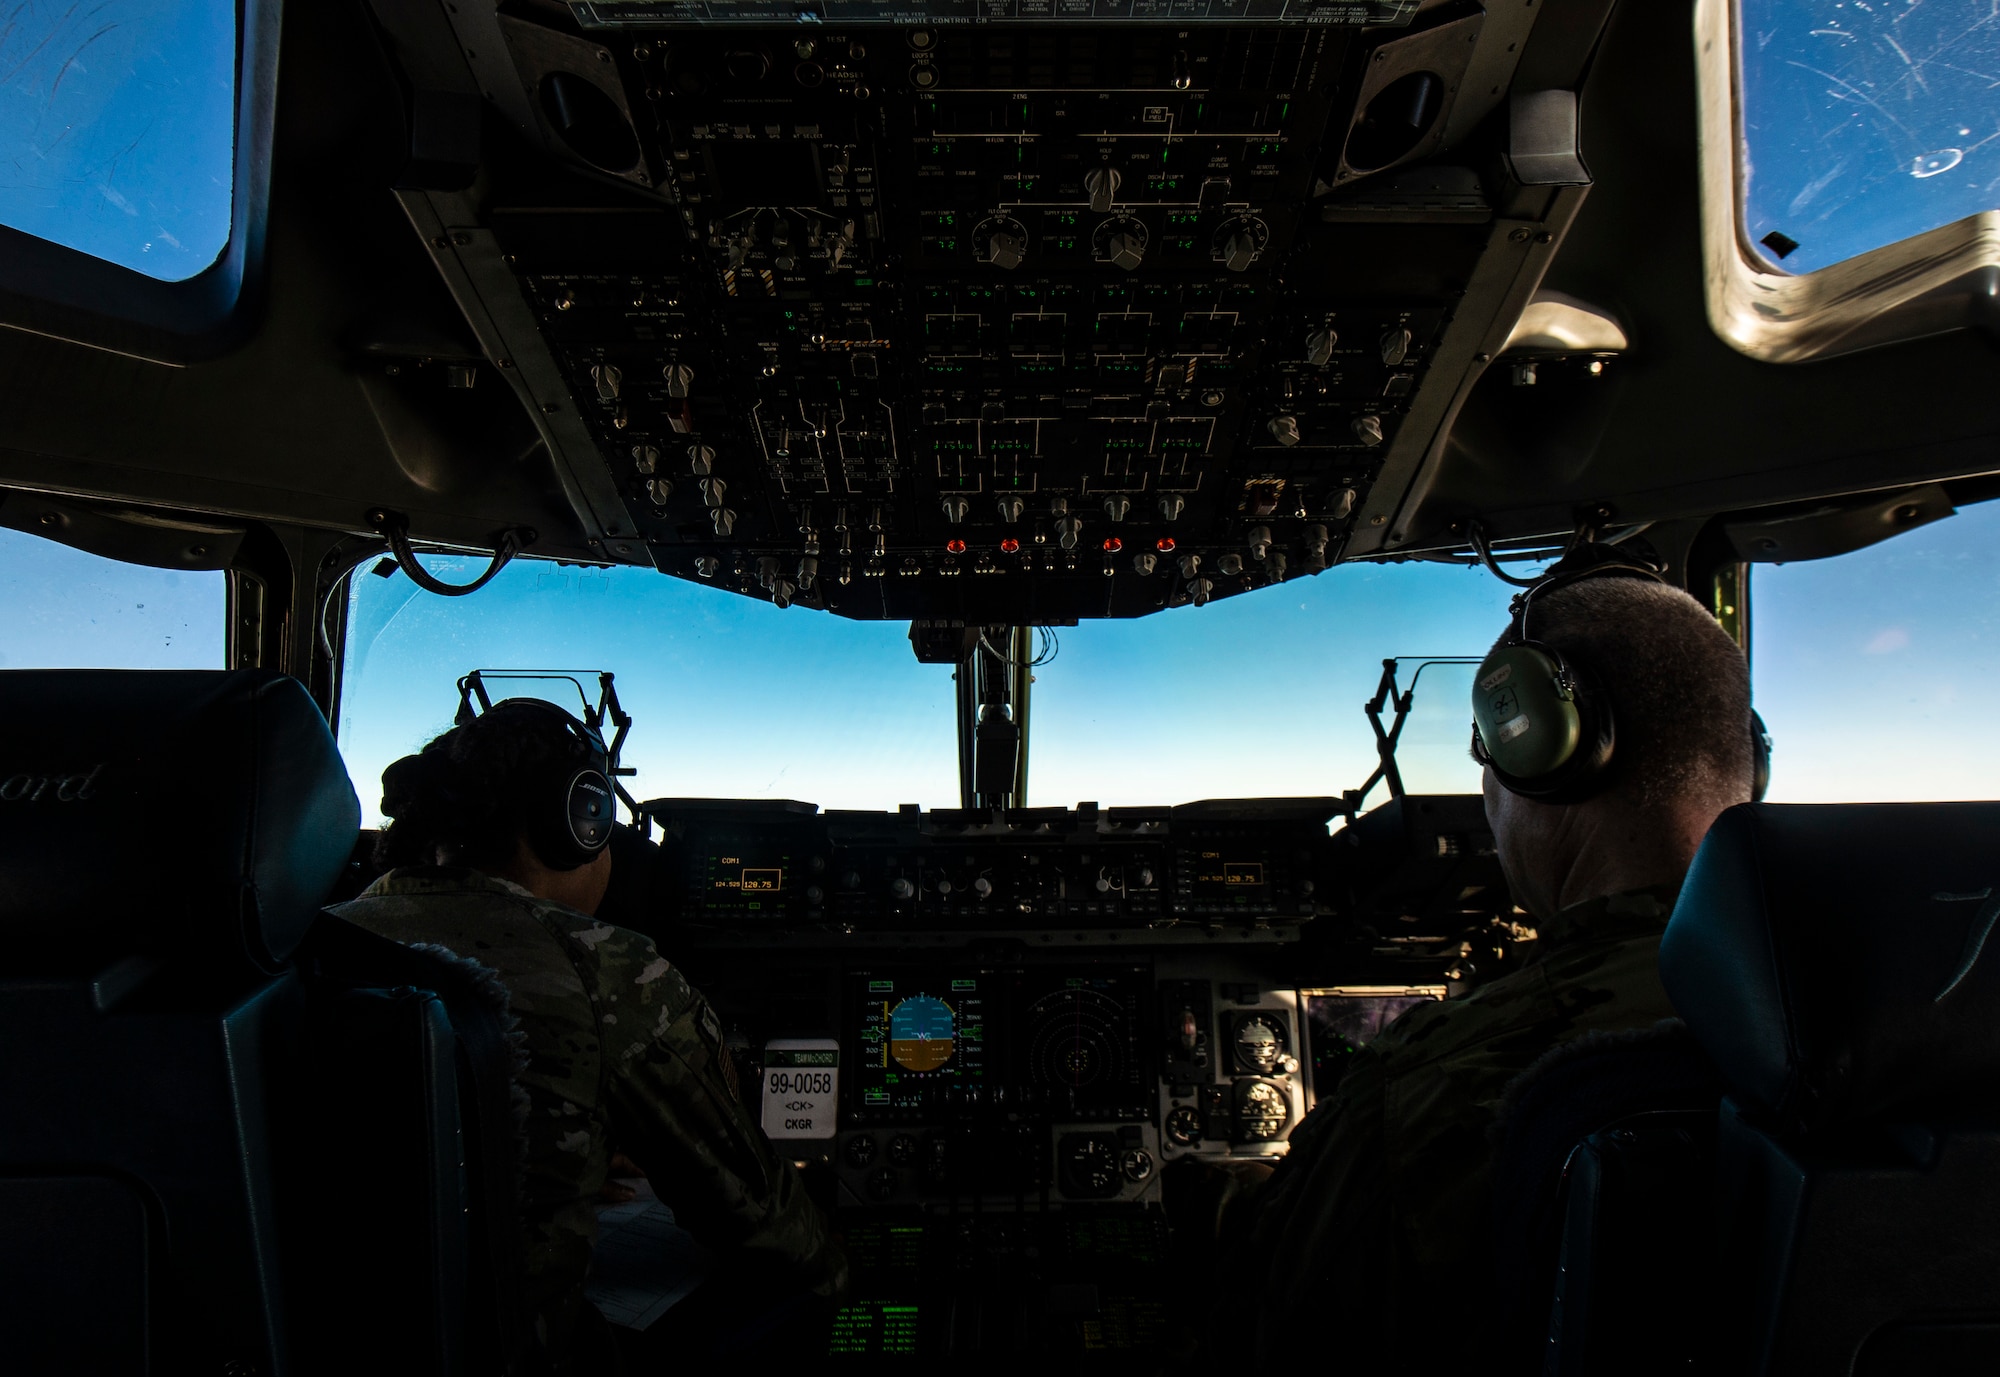 U.S. Air Force 1st Lt. Erica Drakes, 4th Airlift Squadron pilot, left, and U.S. Air Force Col. Brian Collins, 62nd Airlift Wing vice commander, fly a C-17 Globemaster III carrying Airmen assigned to Joint Base Lewis-McChord, Washington; Joint Base McGuire-Dix-Lakehurst, New Jersey; and Dover Air Force Base, Delaware, deploying to the 816th Expeditionary Airlift Squadron at Al Udeid Air Base, Qatar, Nov. 28, 2021. Drakes remained in Qatar as a member of the 816th EAS, while Collins was a part of the air crew returning those who had finished their deployment home. (U.S. Air Force photo by Staff Sgt. Tryphena Mayhugh)